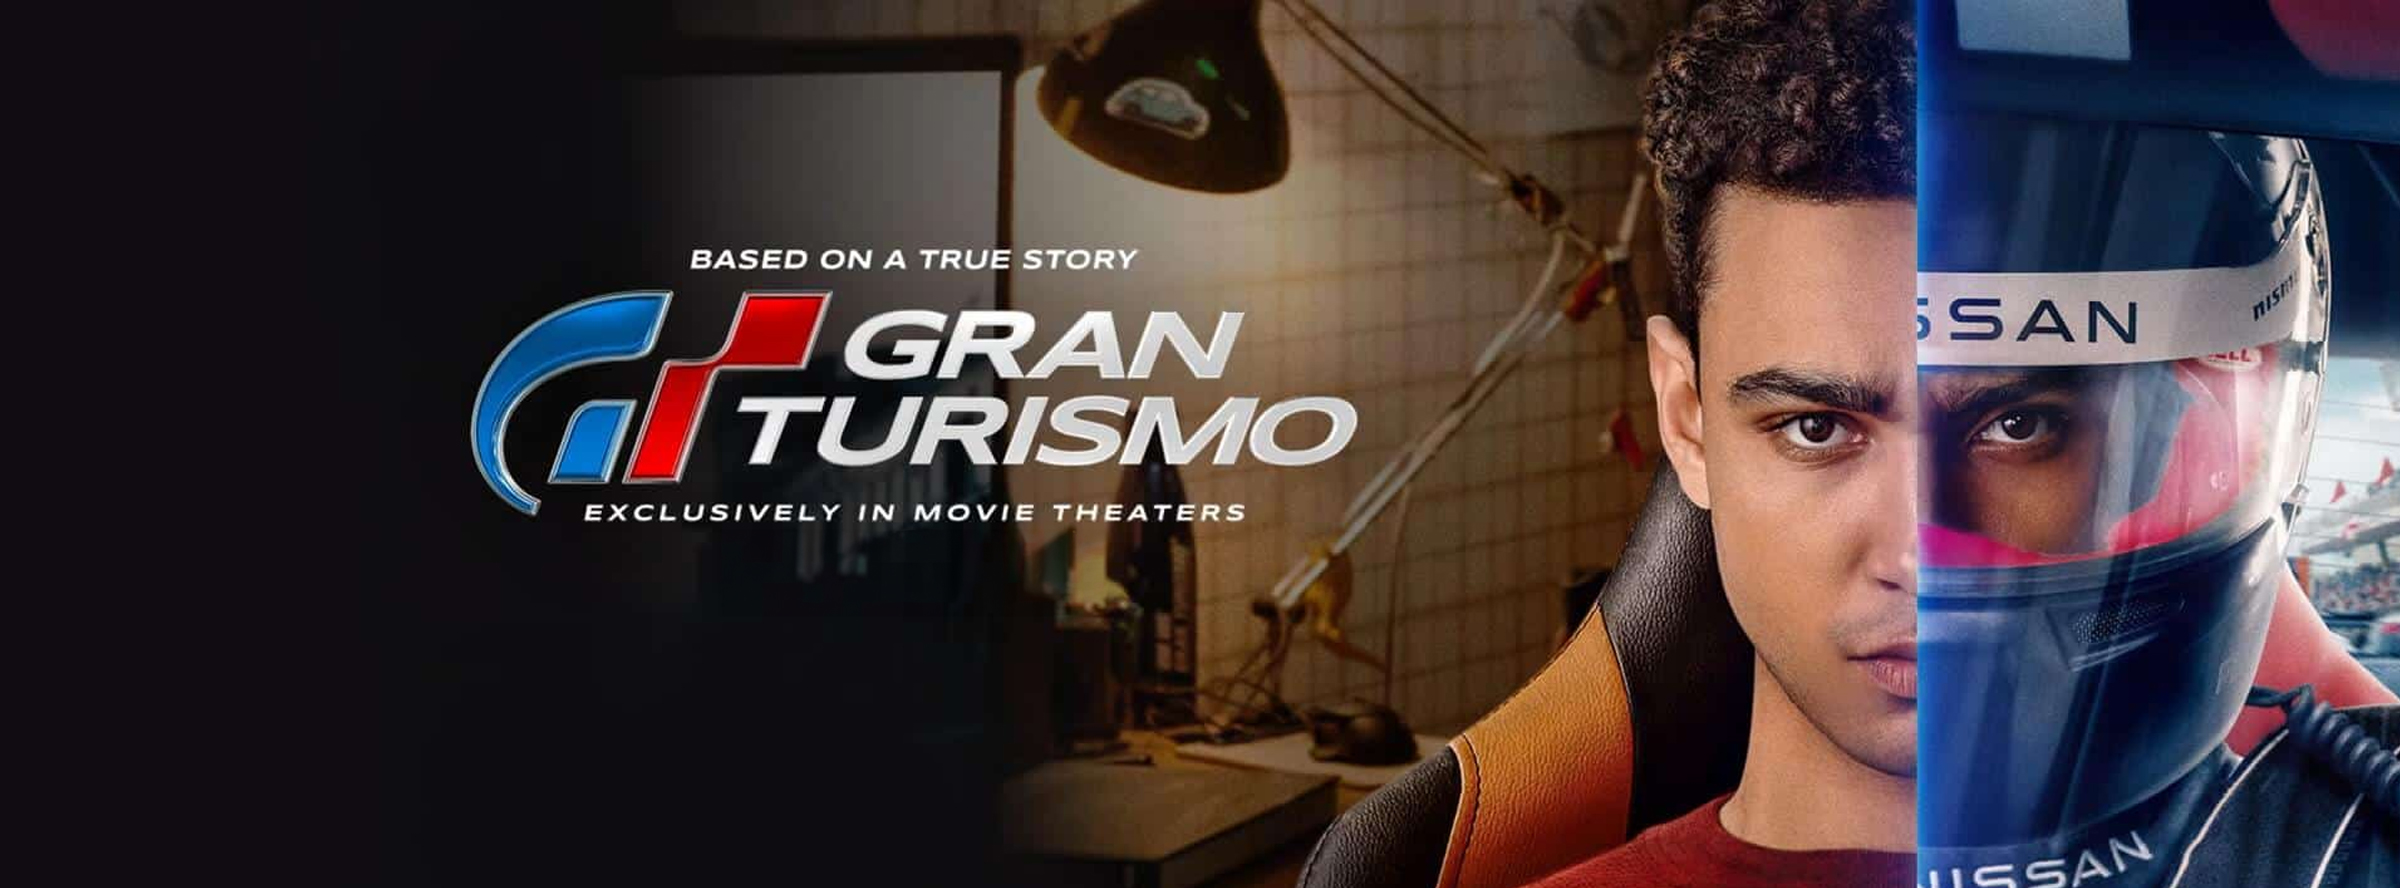 Slider Image for Gran Turismo: Based On a True Story